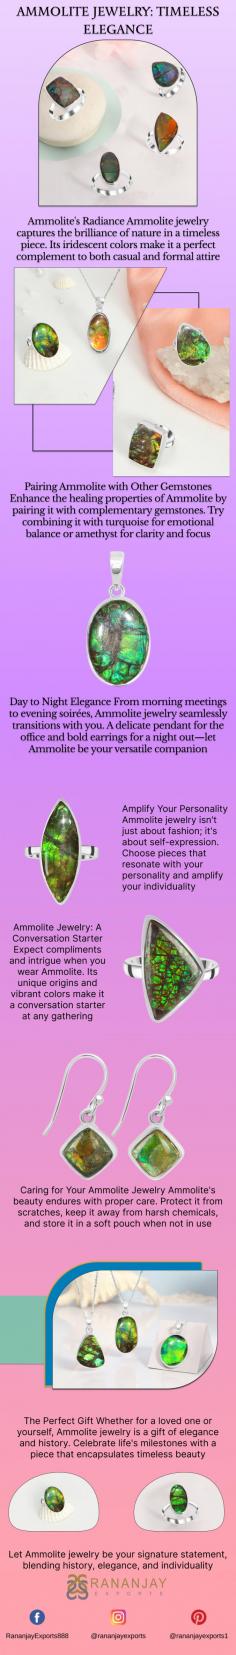 Ammolite's Radiance Ammolite jewelry captures the brilliance of nature in a timeless piece. Its iridescent colors make it a perfect complement to both casual and formal attire.
Pairing Ammolite with Other Gemstones Enhance the healing properties of Ammolite by pairing it with complementary gemstones. Try combining it with turquoise for emotional balance or amethyst for clarity and focus.